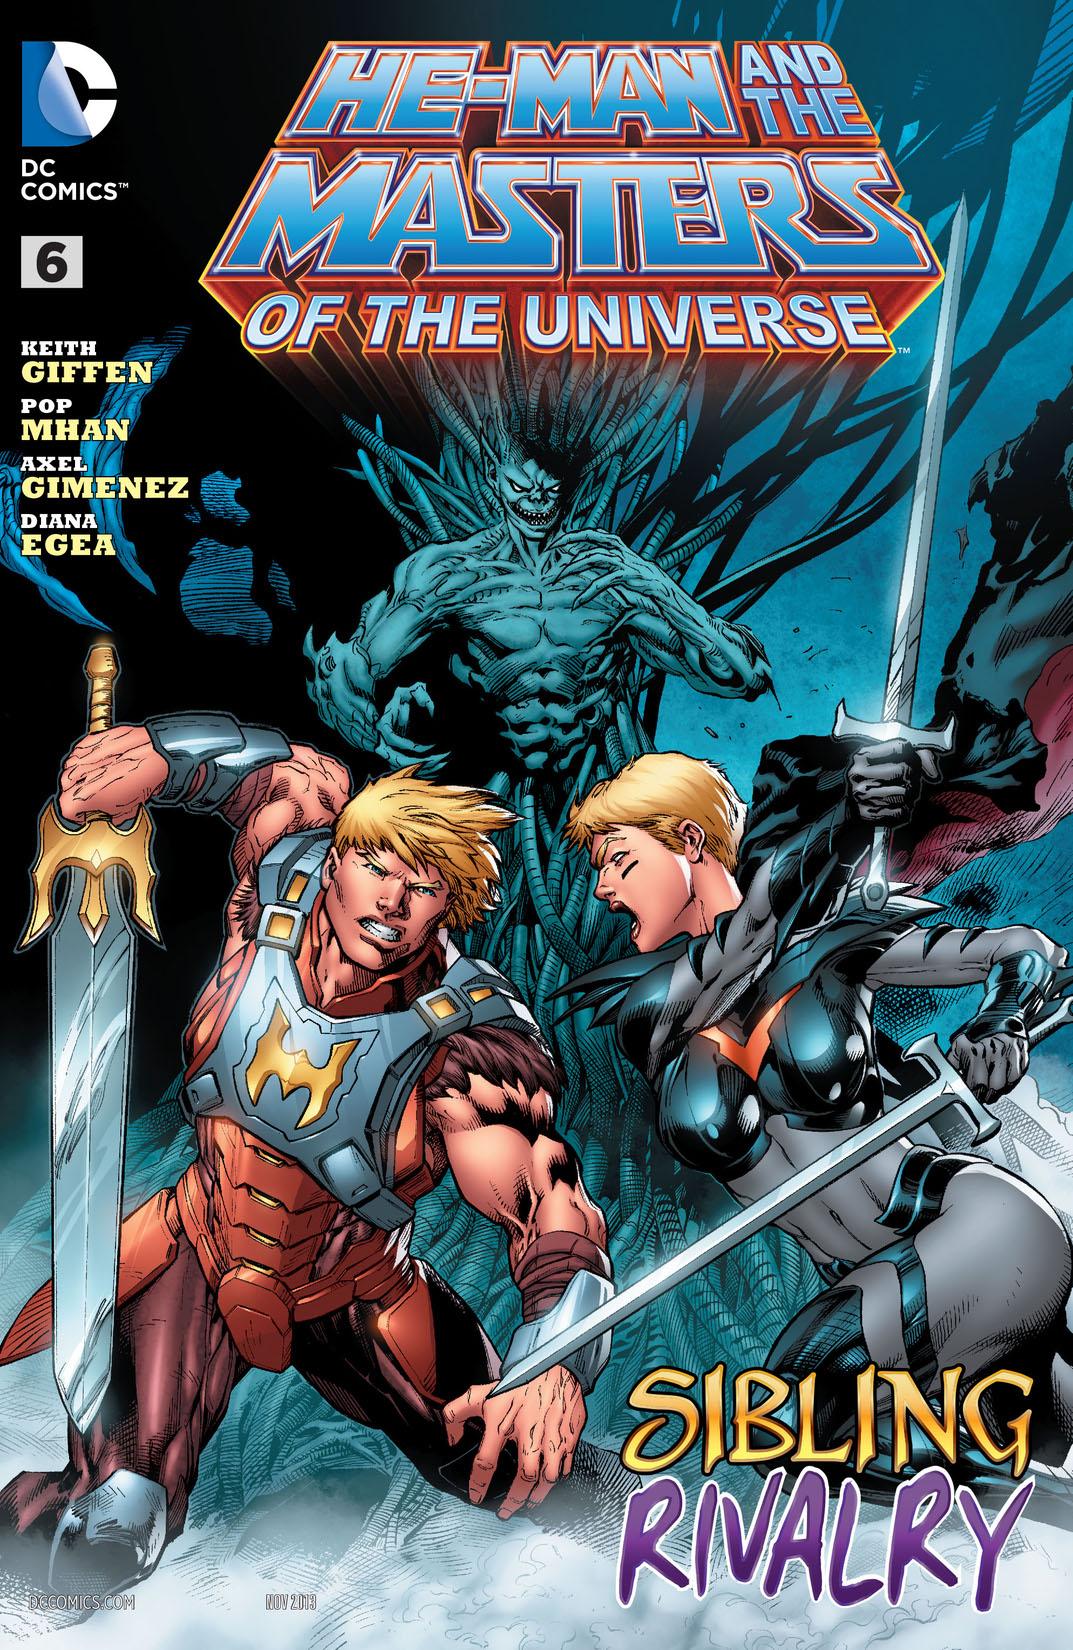 He-Man and the Masters of the Universe (2013-) #6 preview images